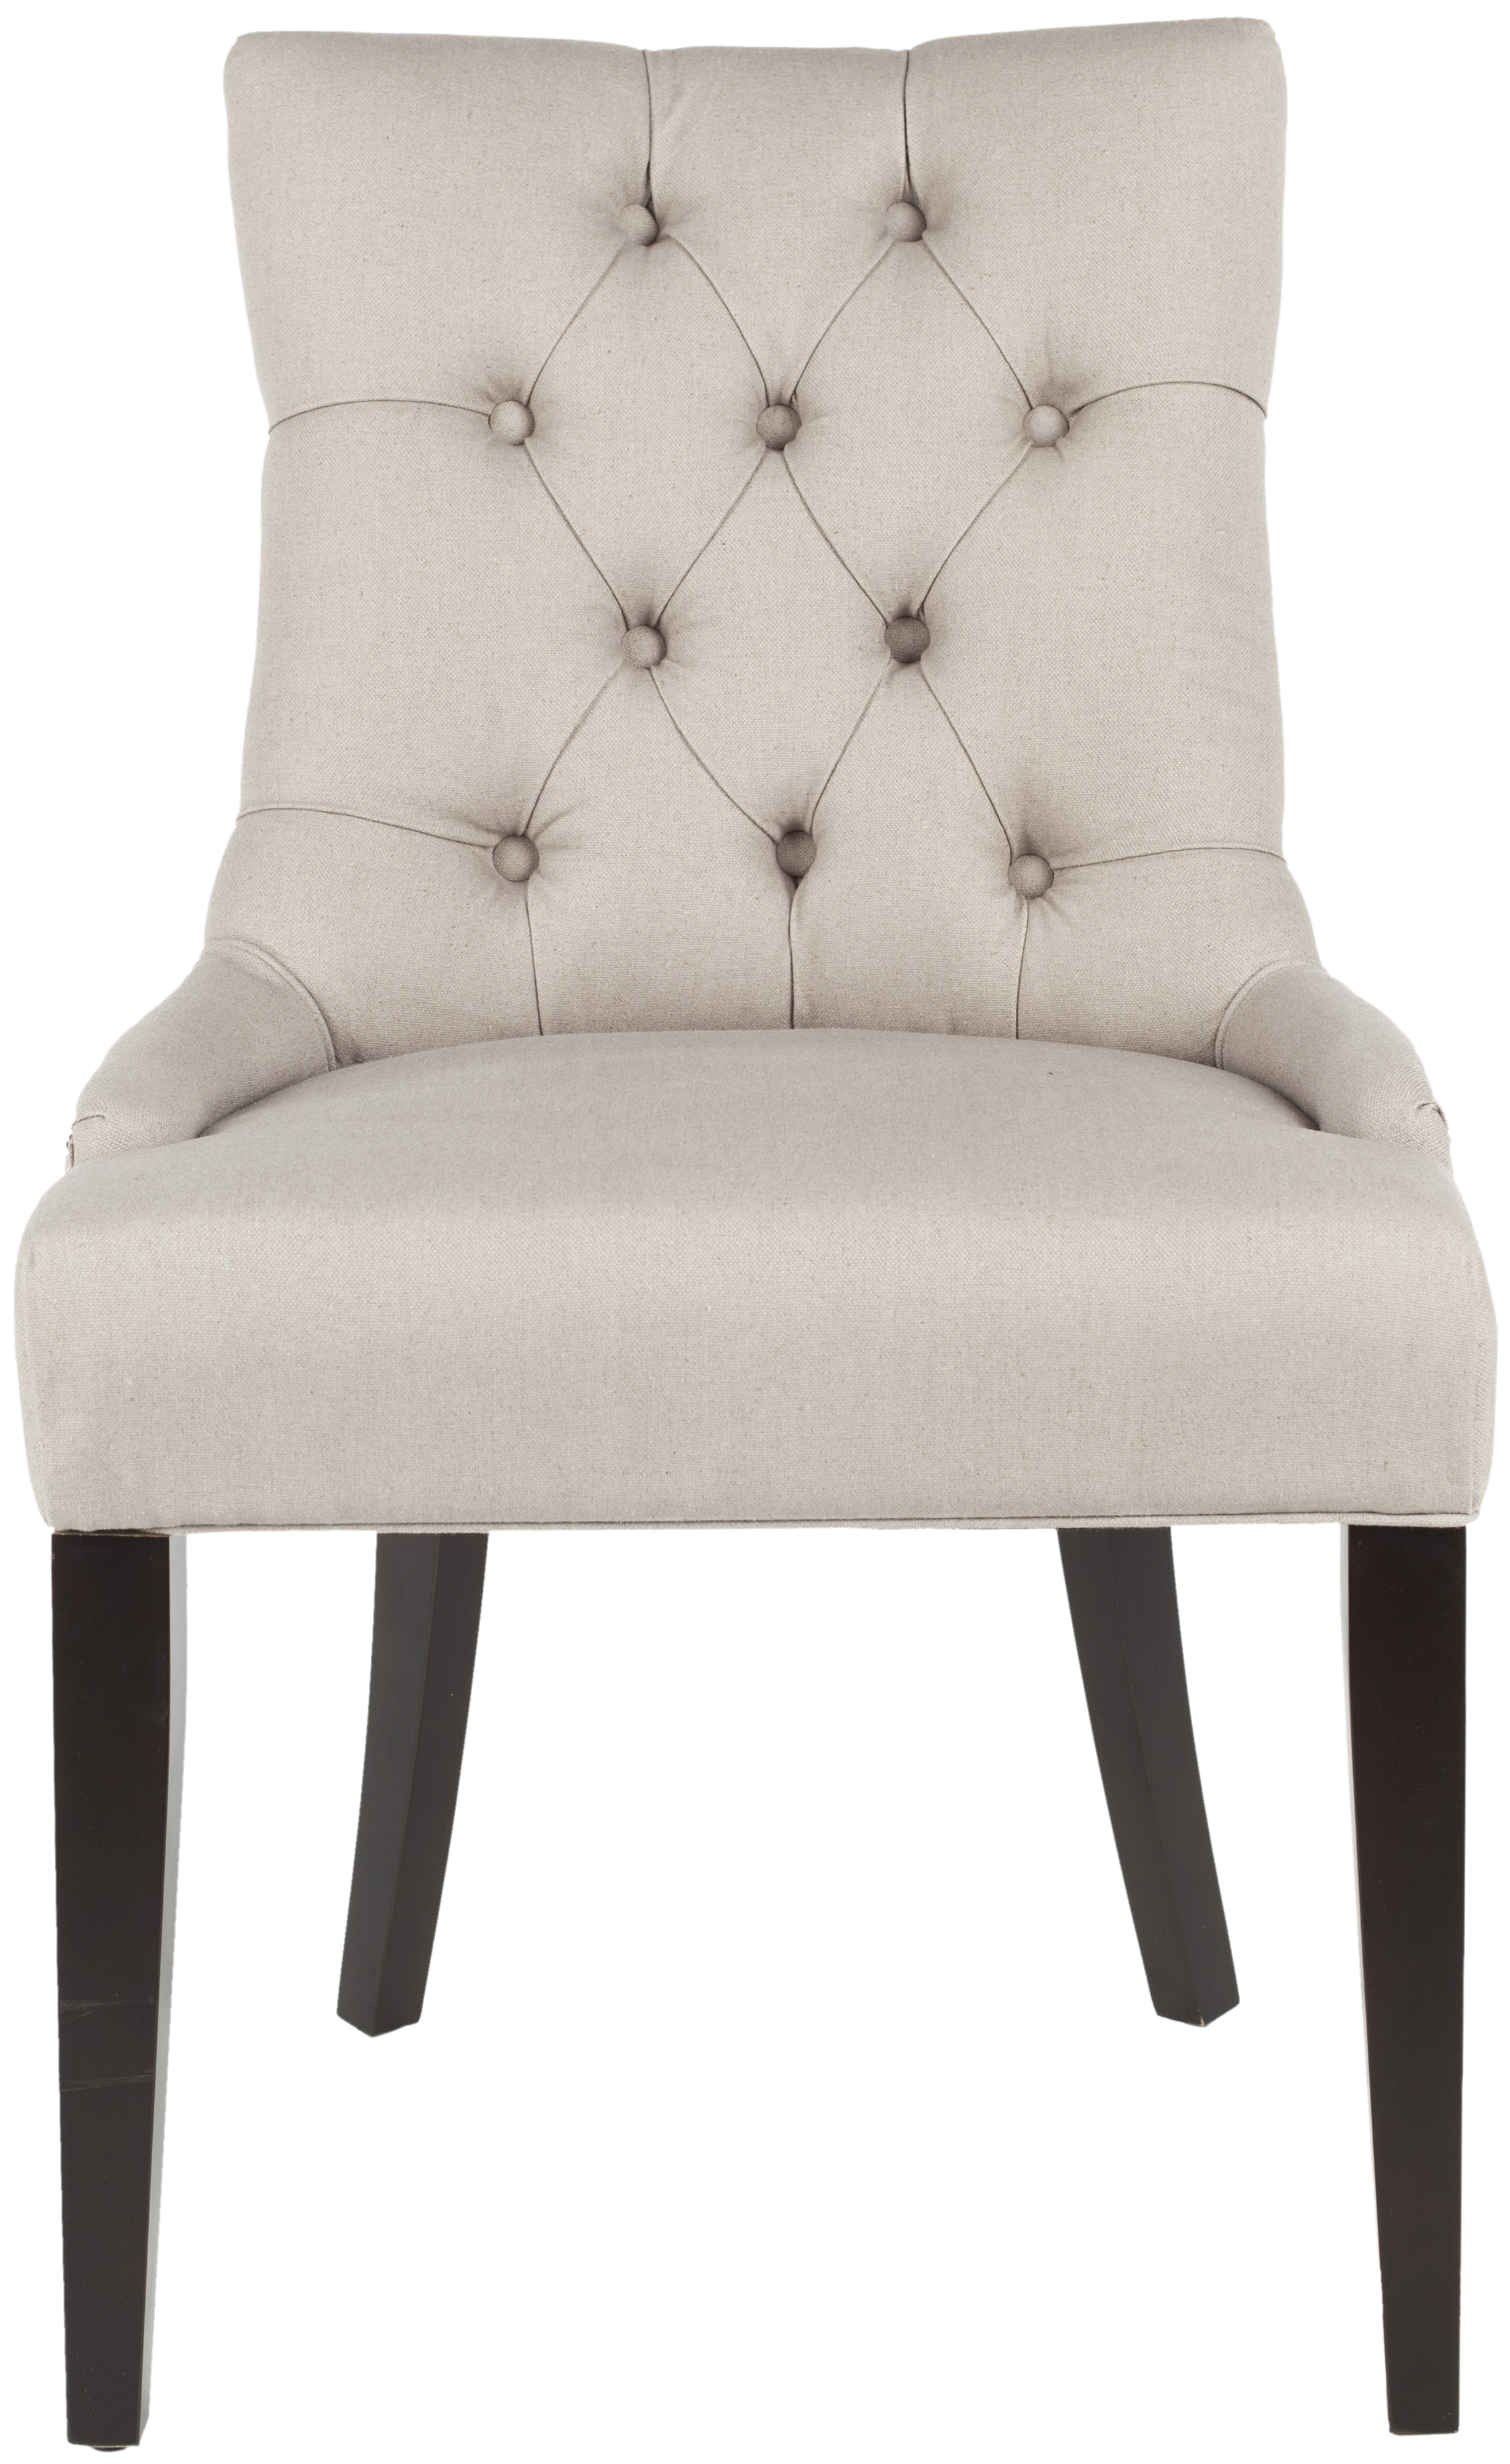 Abby 19''H Tufted Side Chairs (Set Of 2) - Silver Nail Heads - Taupe/Espresso - Arlo Home - Image 0